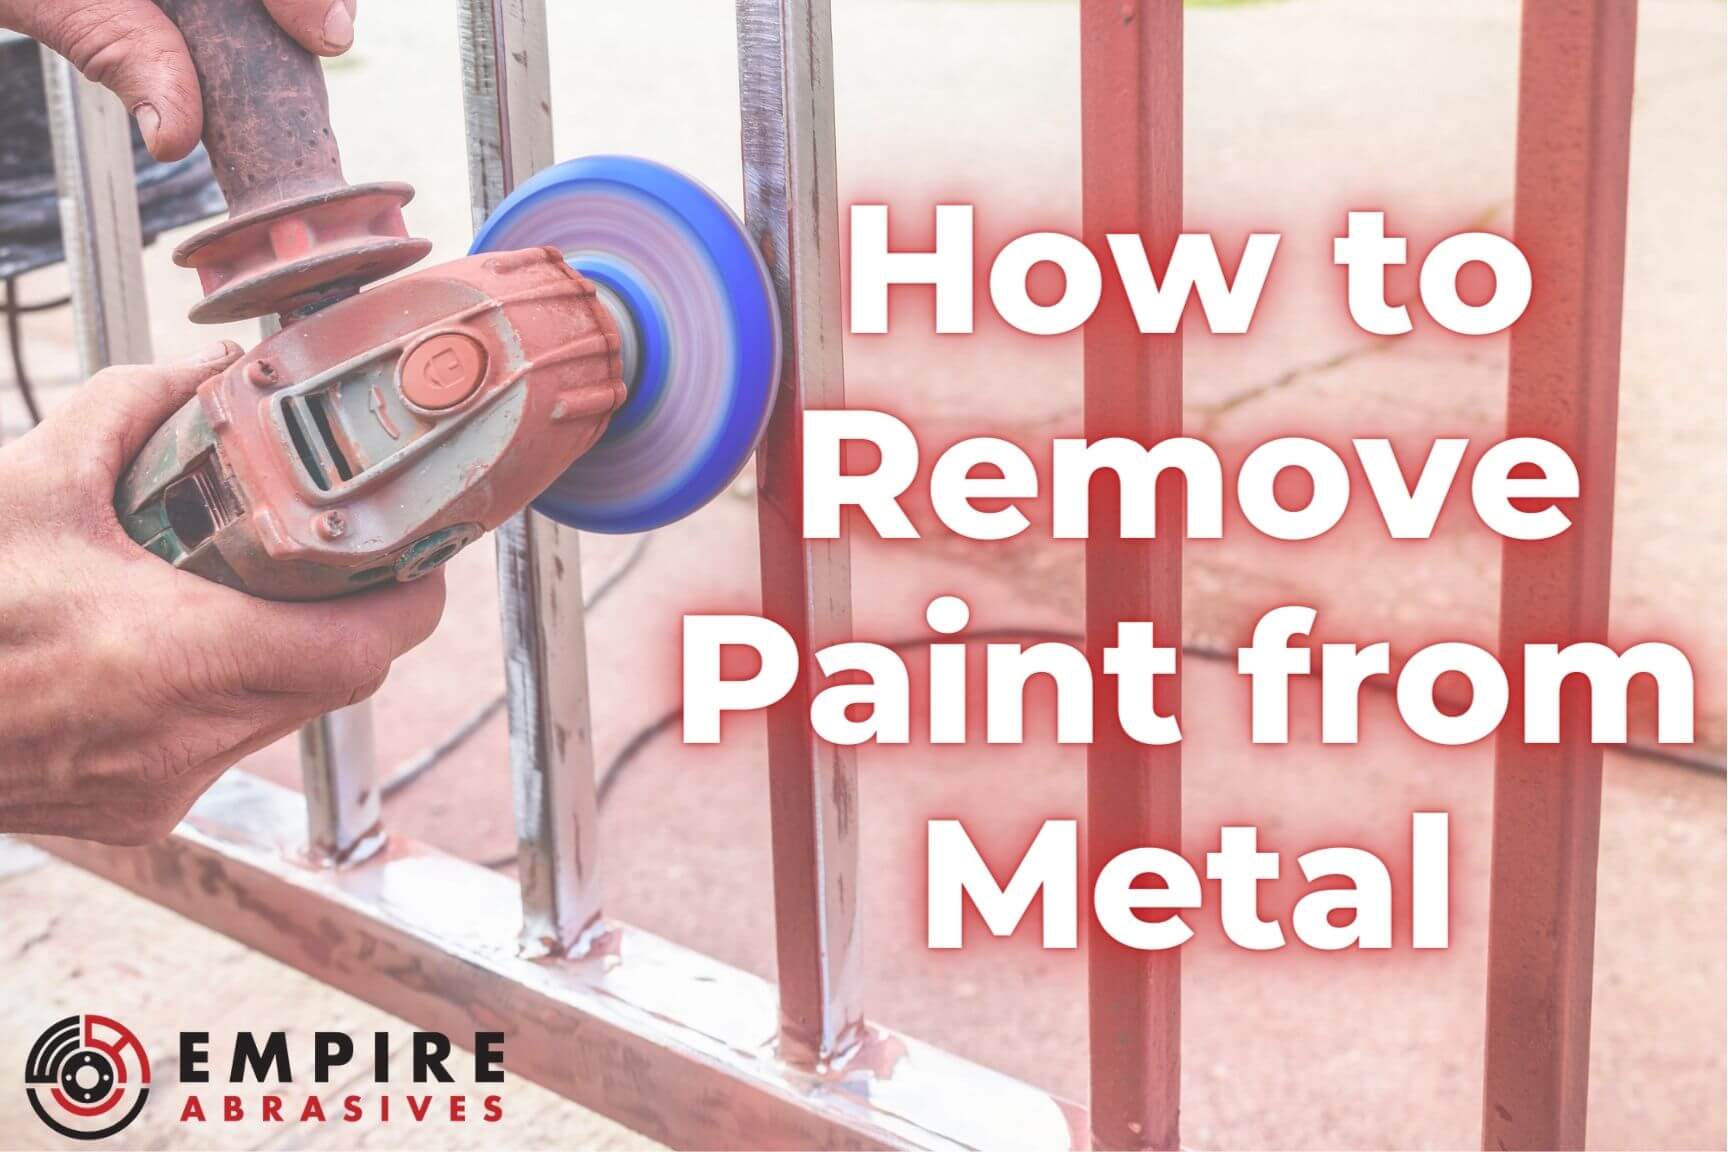 The Best Paint Stripper For Wood: How To Remove Old Paint Easily